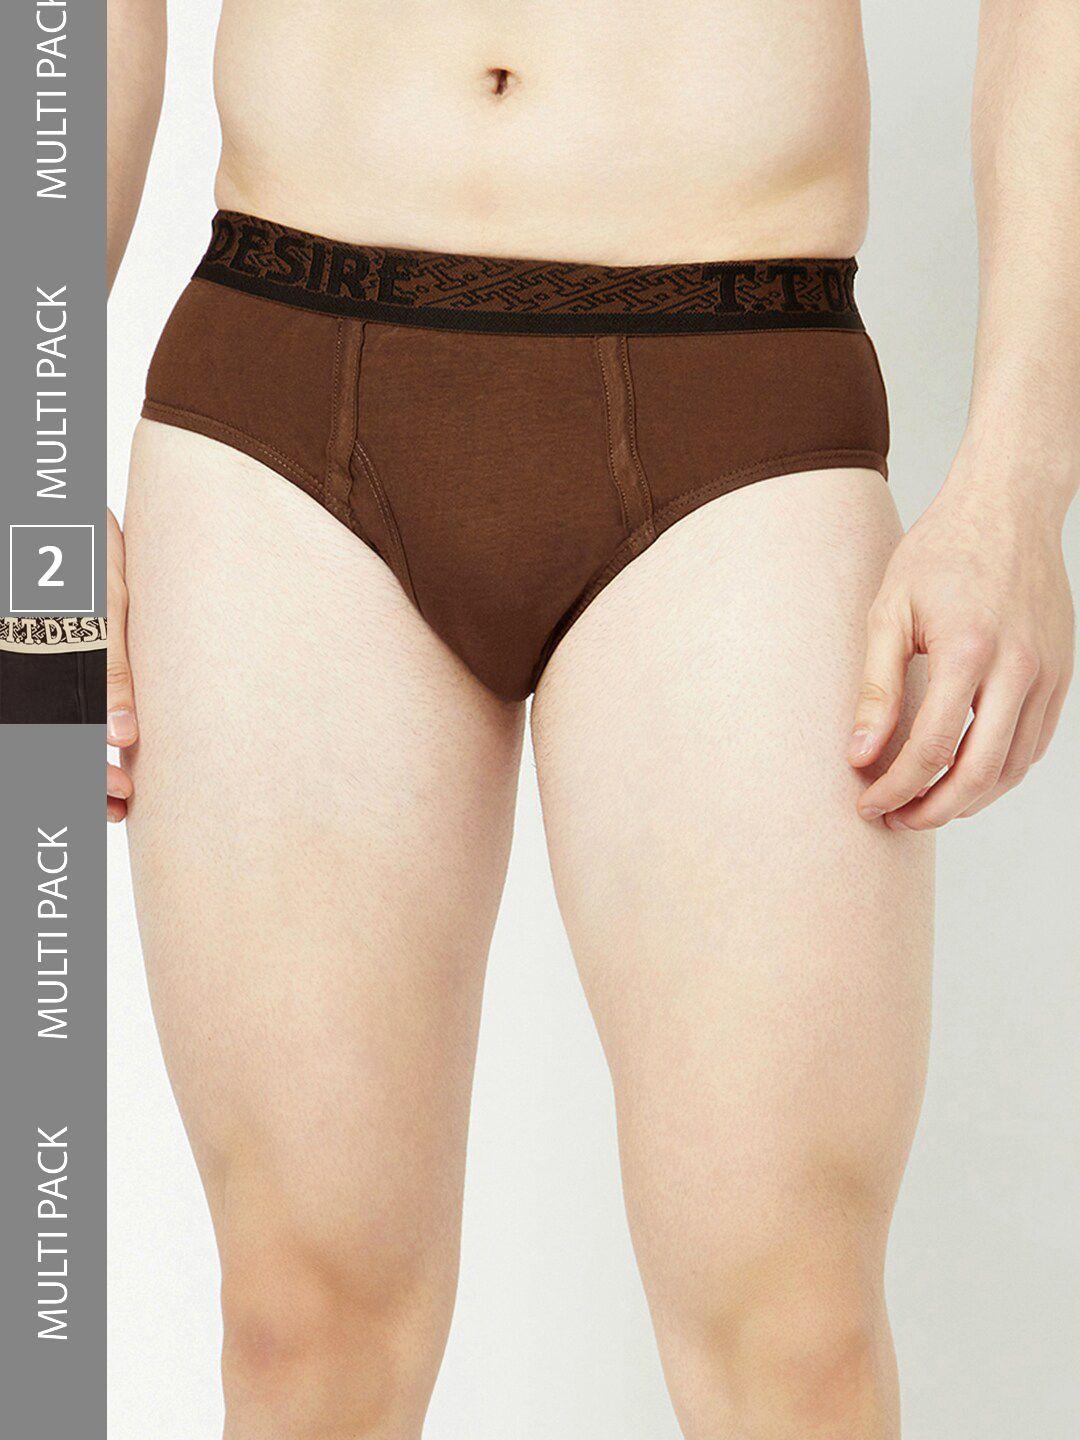 t.t. mens desire 100% combed cotton front open brief top elastic pack of 2 brown & mustard